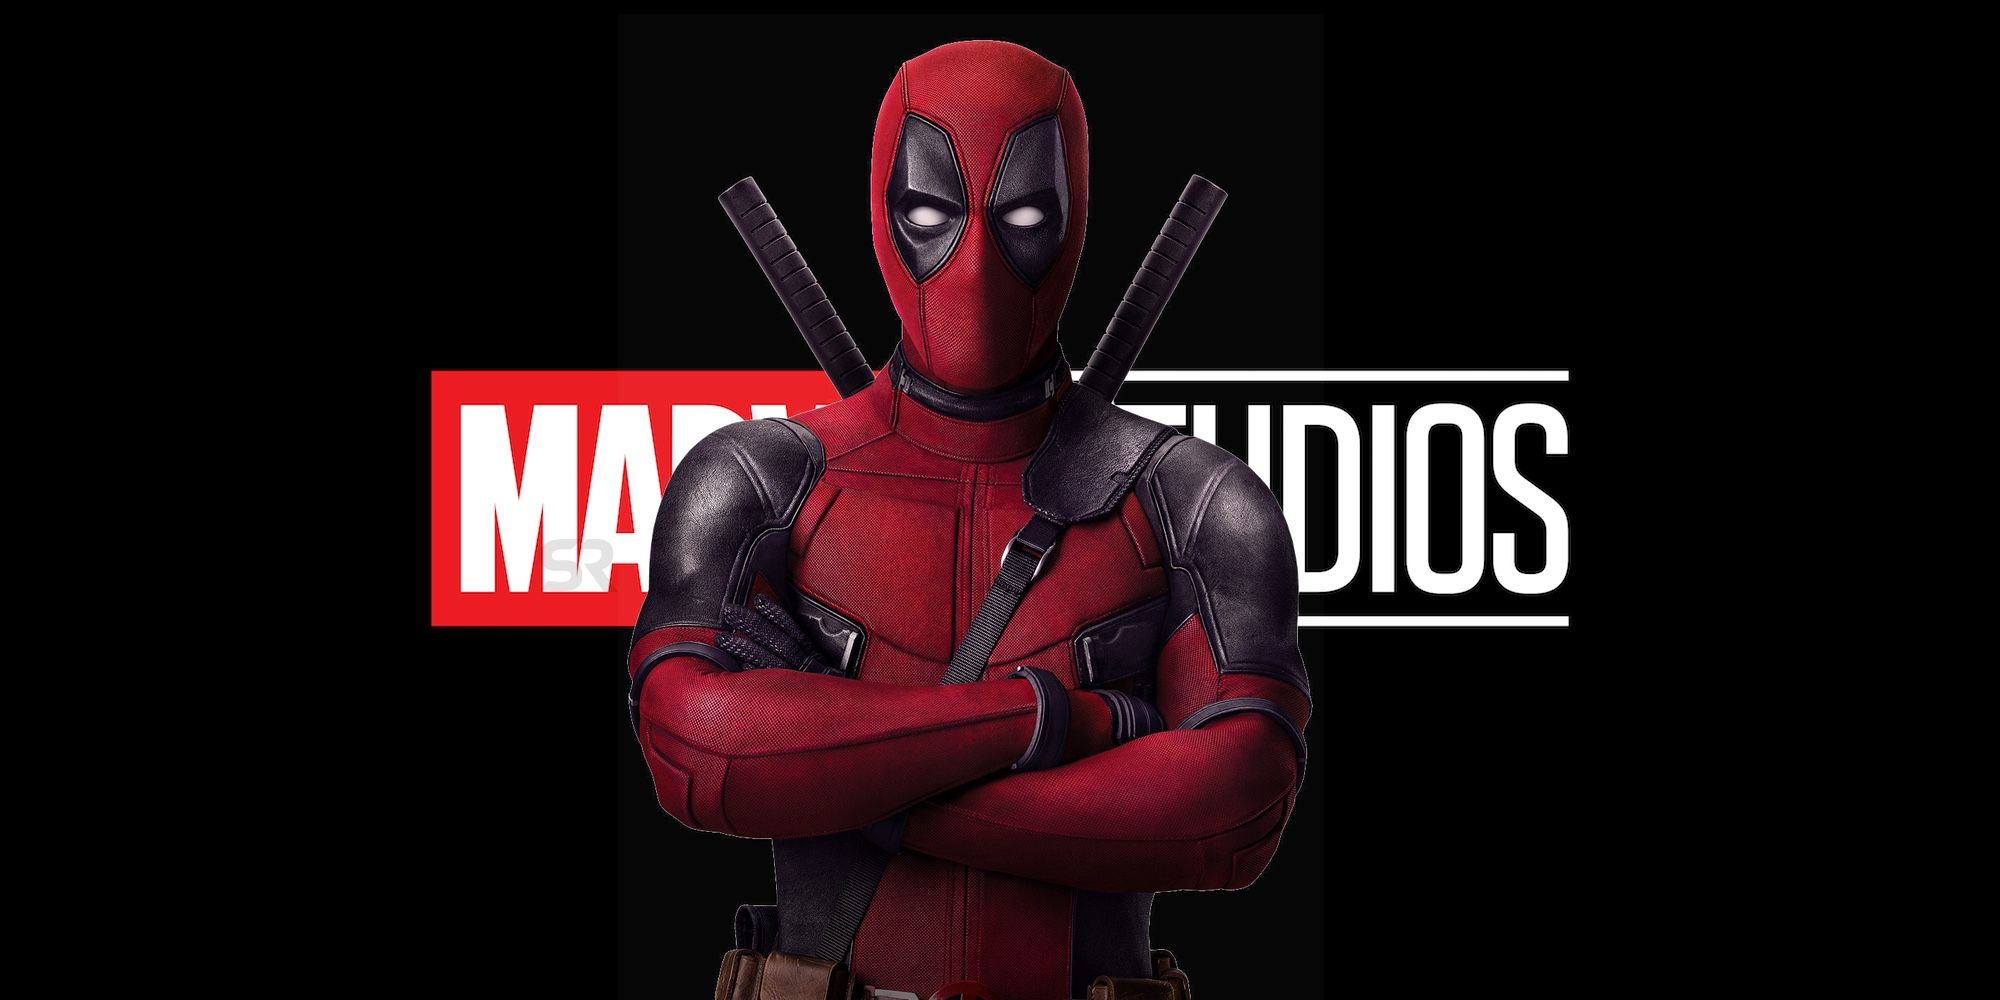 Superimposed image of Deadpool standing in front of the Marvel Studios logo.